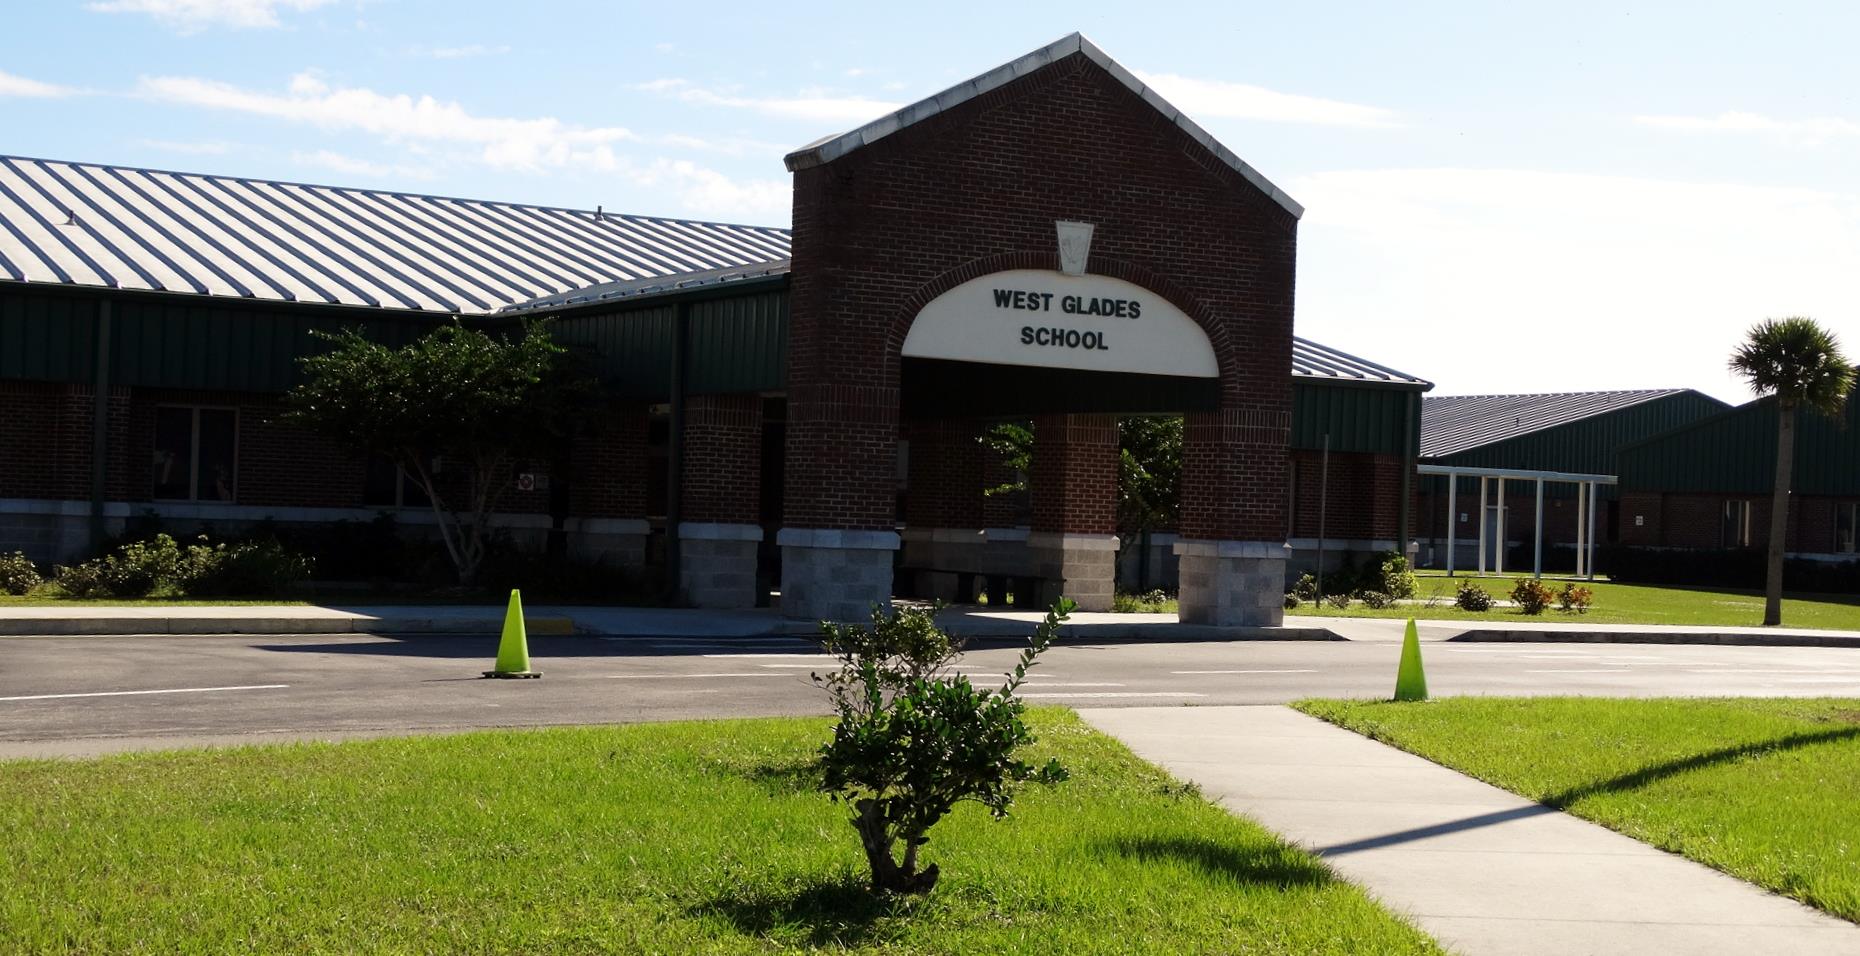 Picture of West Glades School building (entrance)